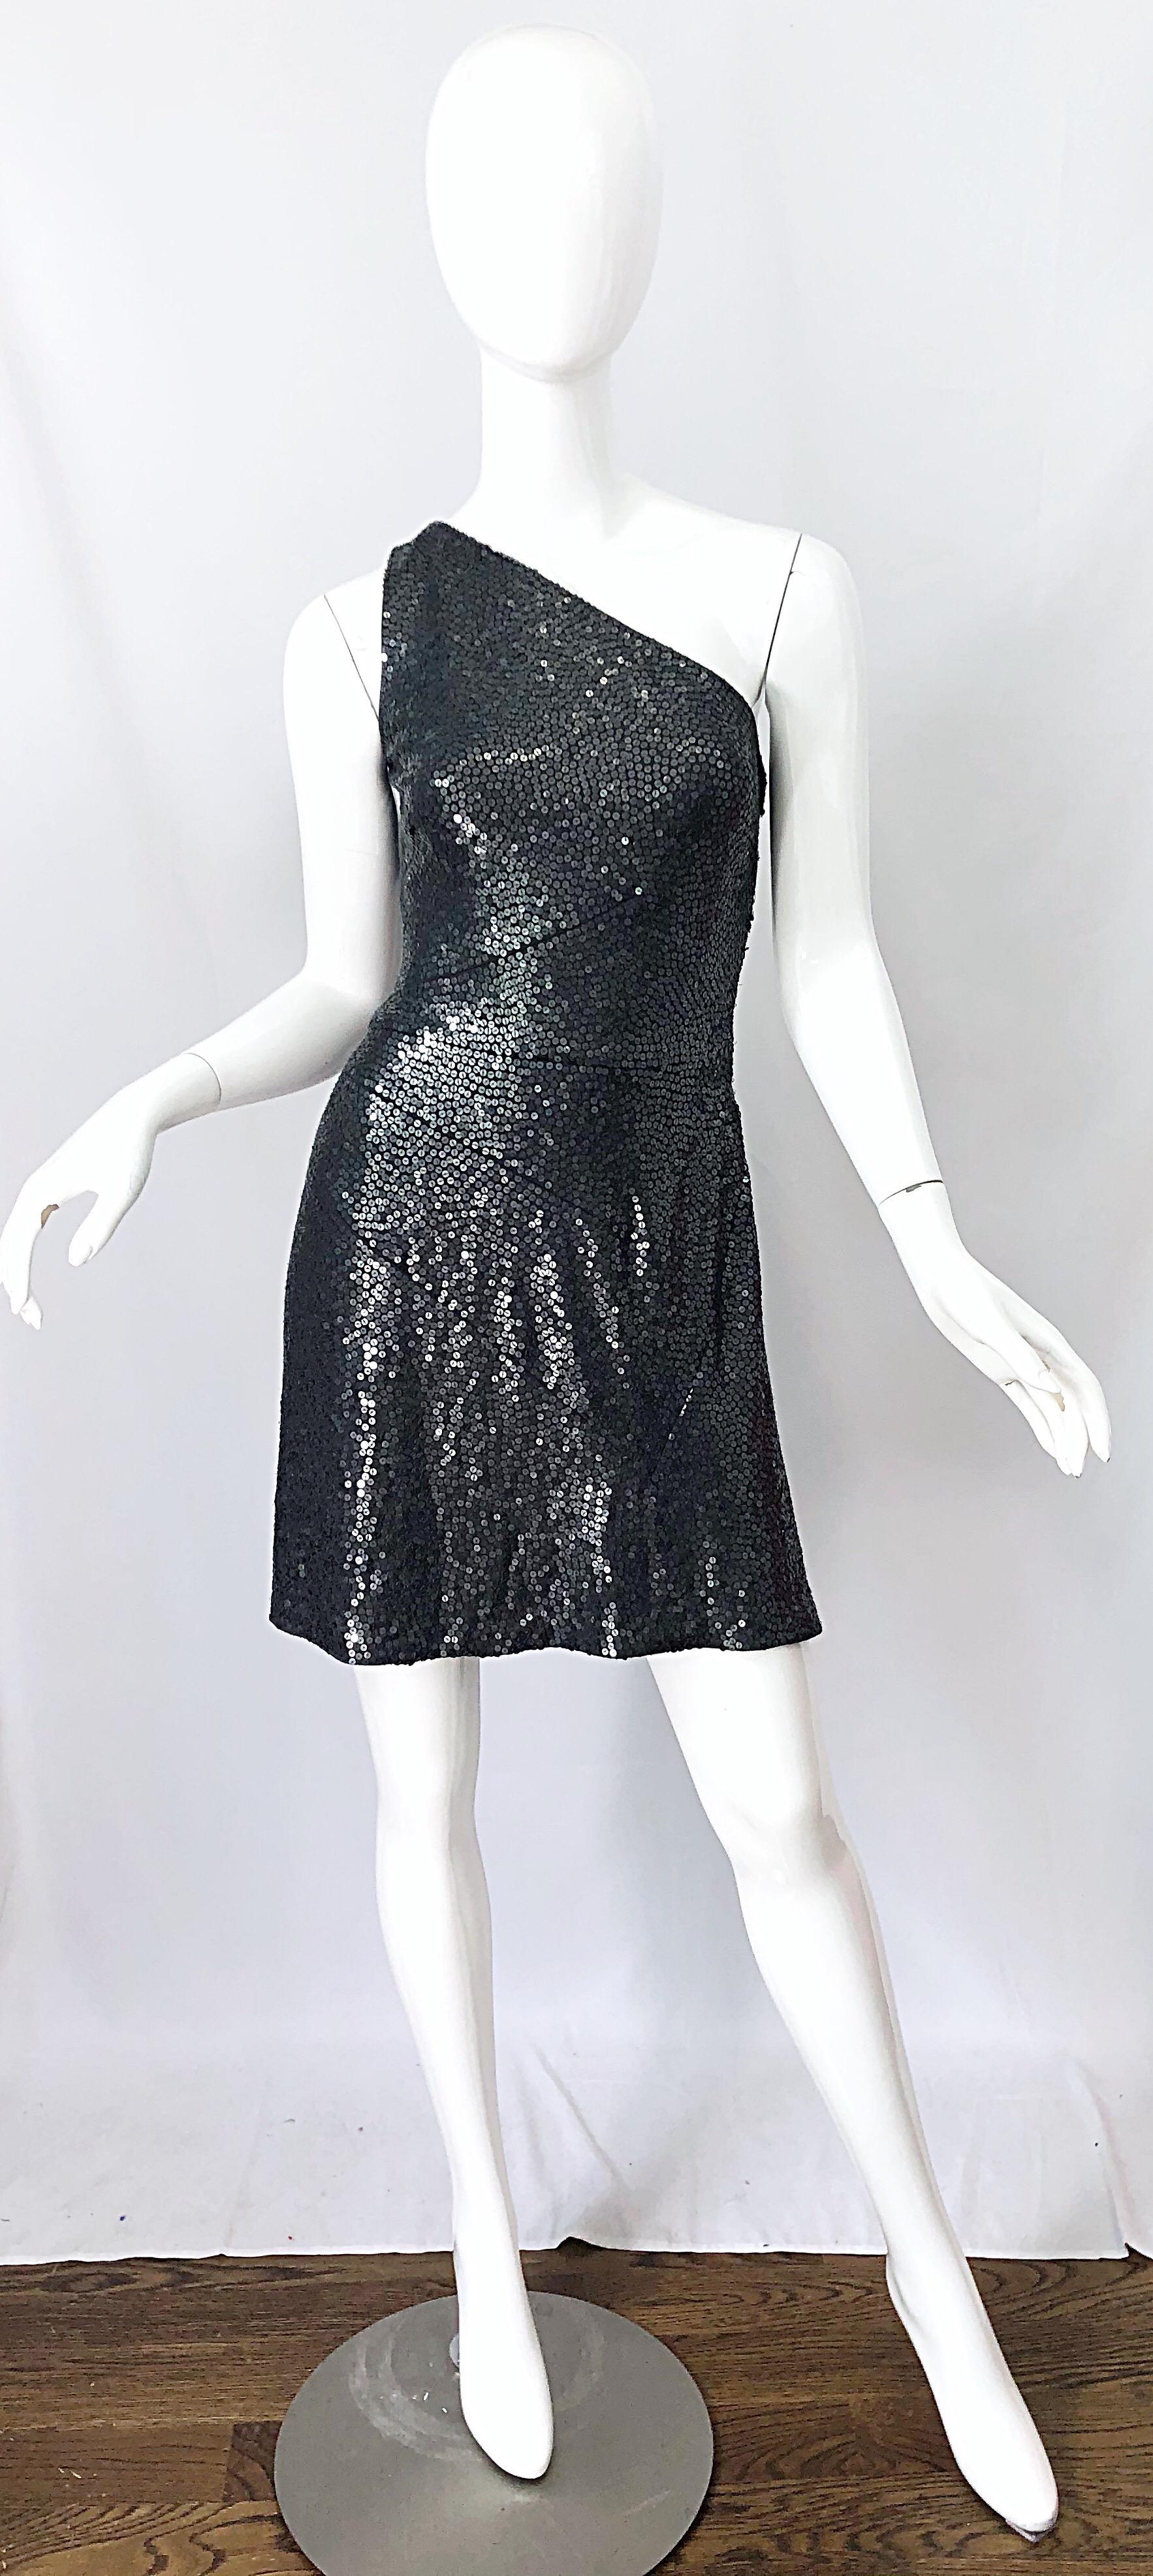 Chic mid 2000s $2,798 MICHAEL KORS COLLECTION gray fully sequined one shoulder mini dress ! Features thousands of hand-sewn grey sequins throughout on a stretch double face jersey. Hidden zipper up the side with hook-and-eye closure. Very flattering